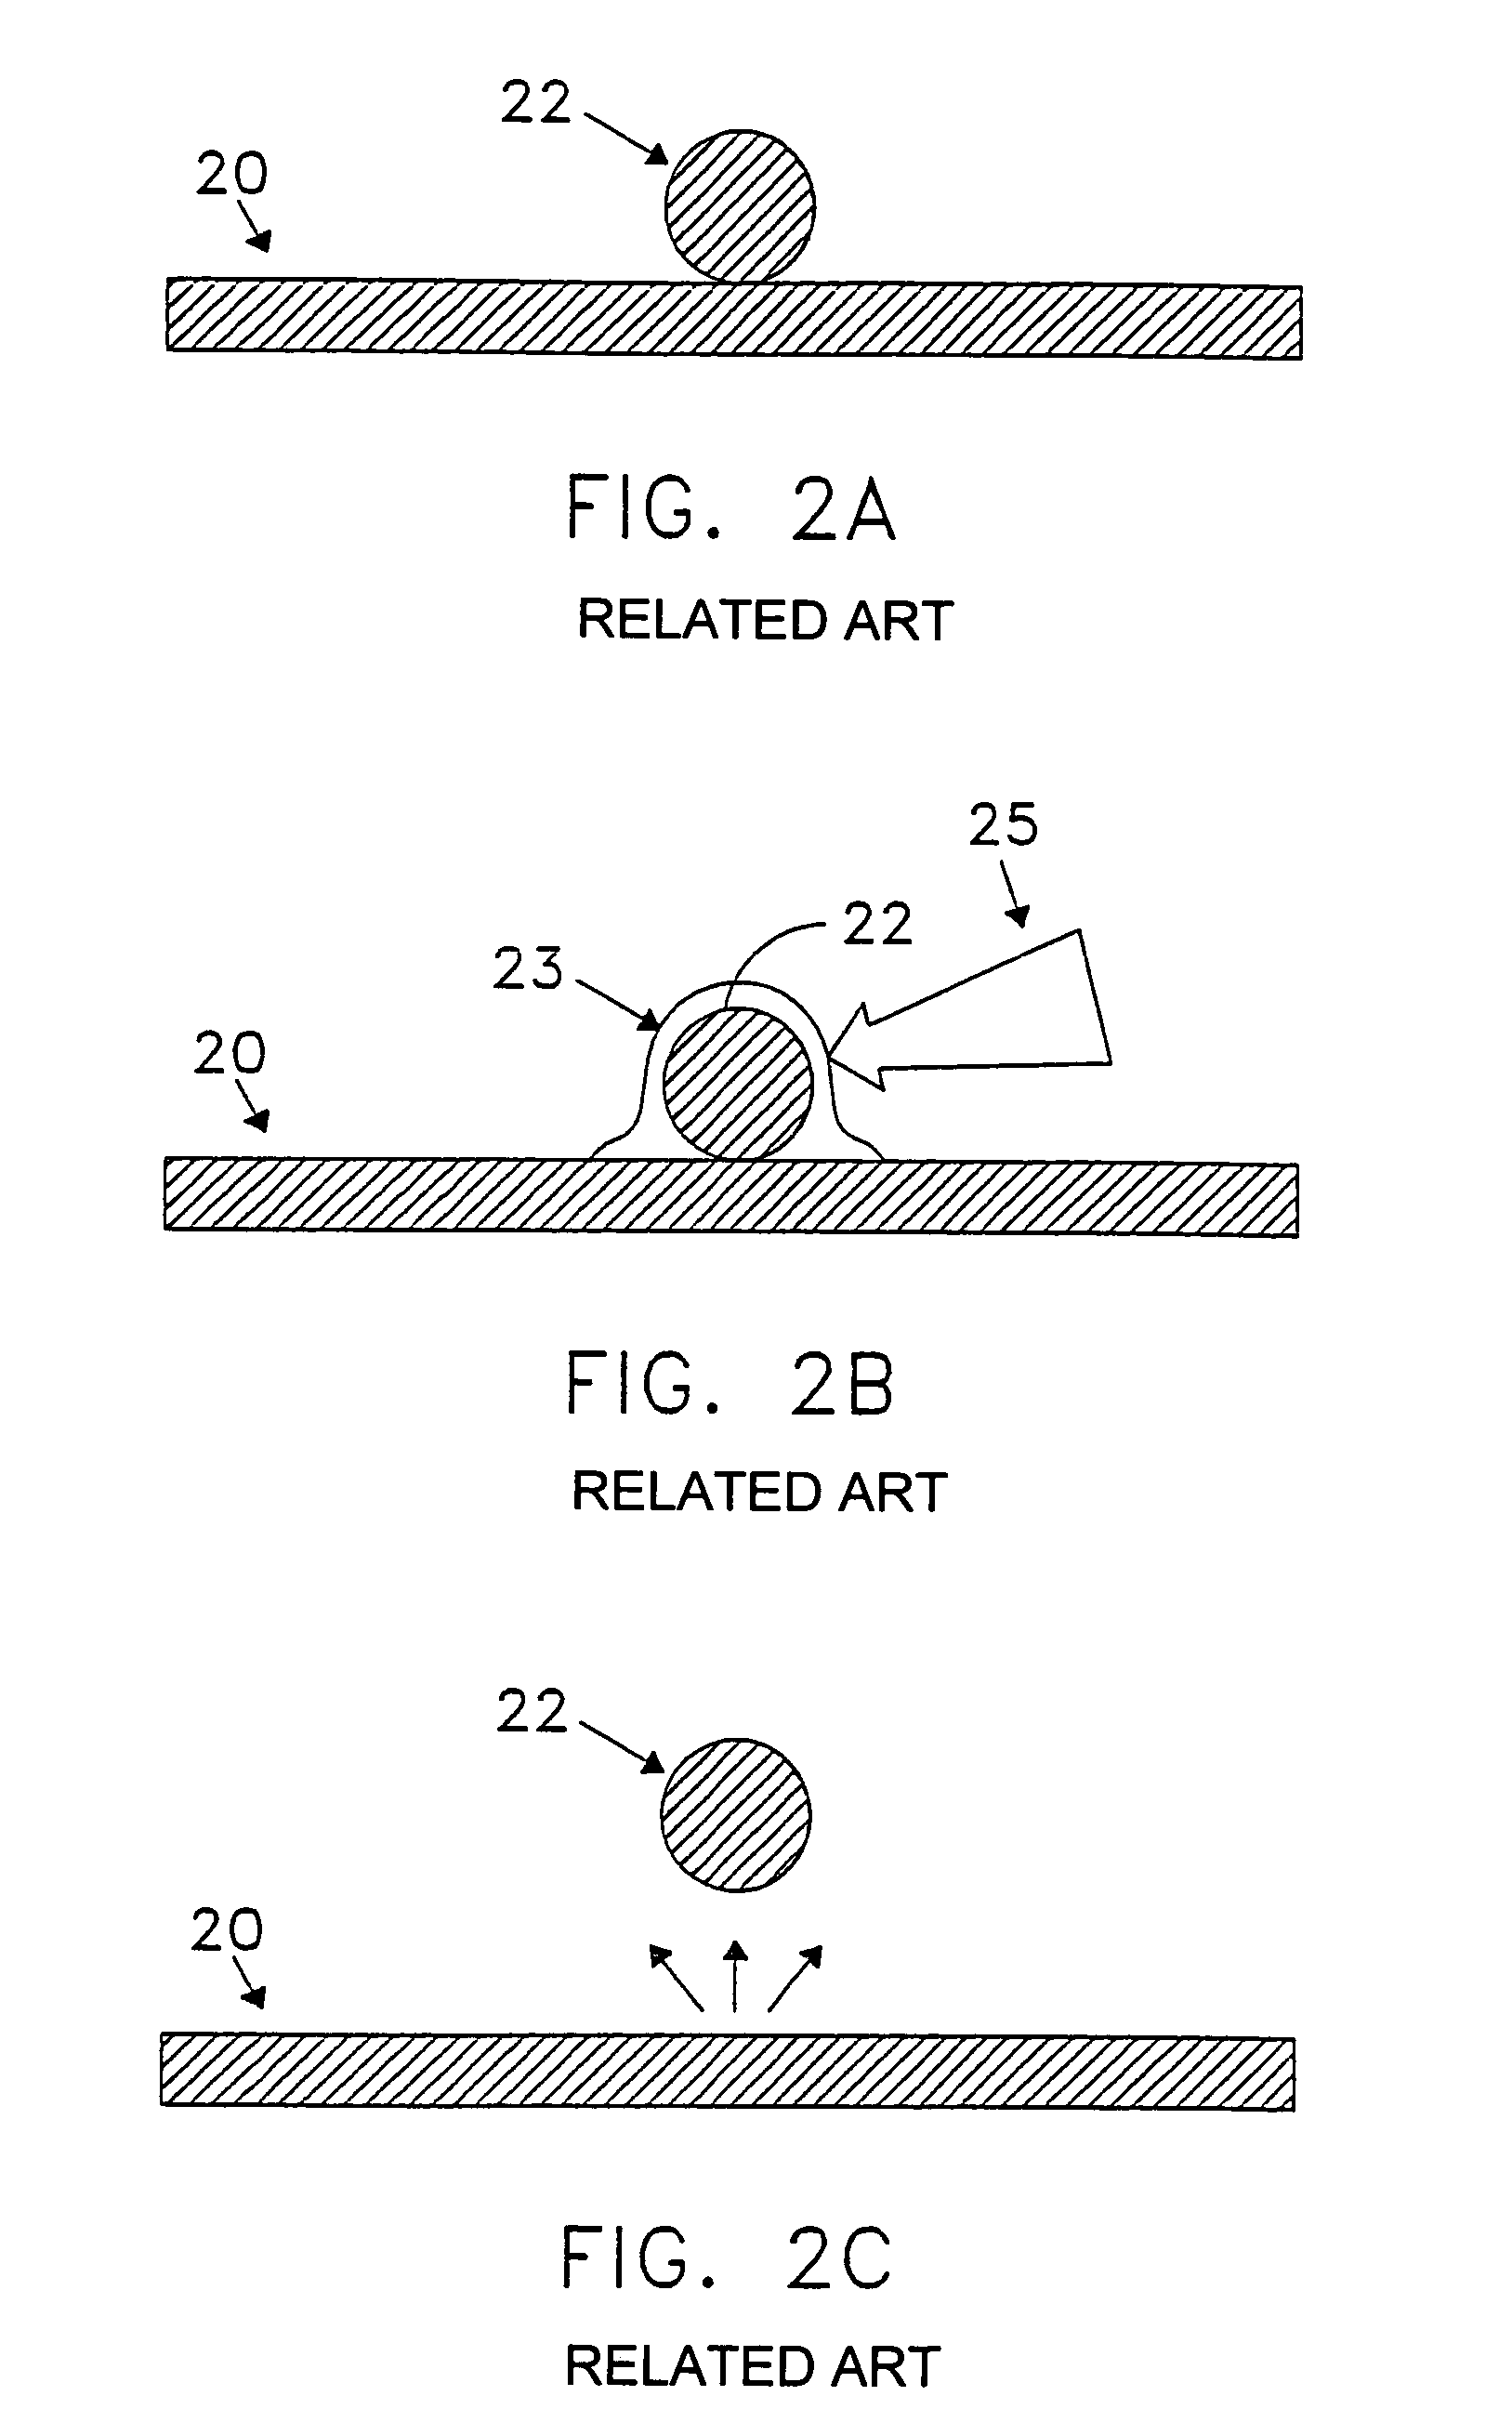 Apparatus for removal of minute particles from a surface using thermophoresis to prevent particle redeposition